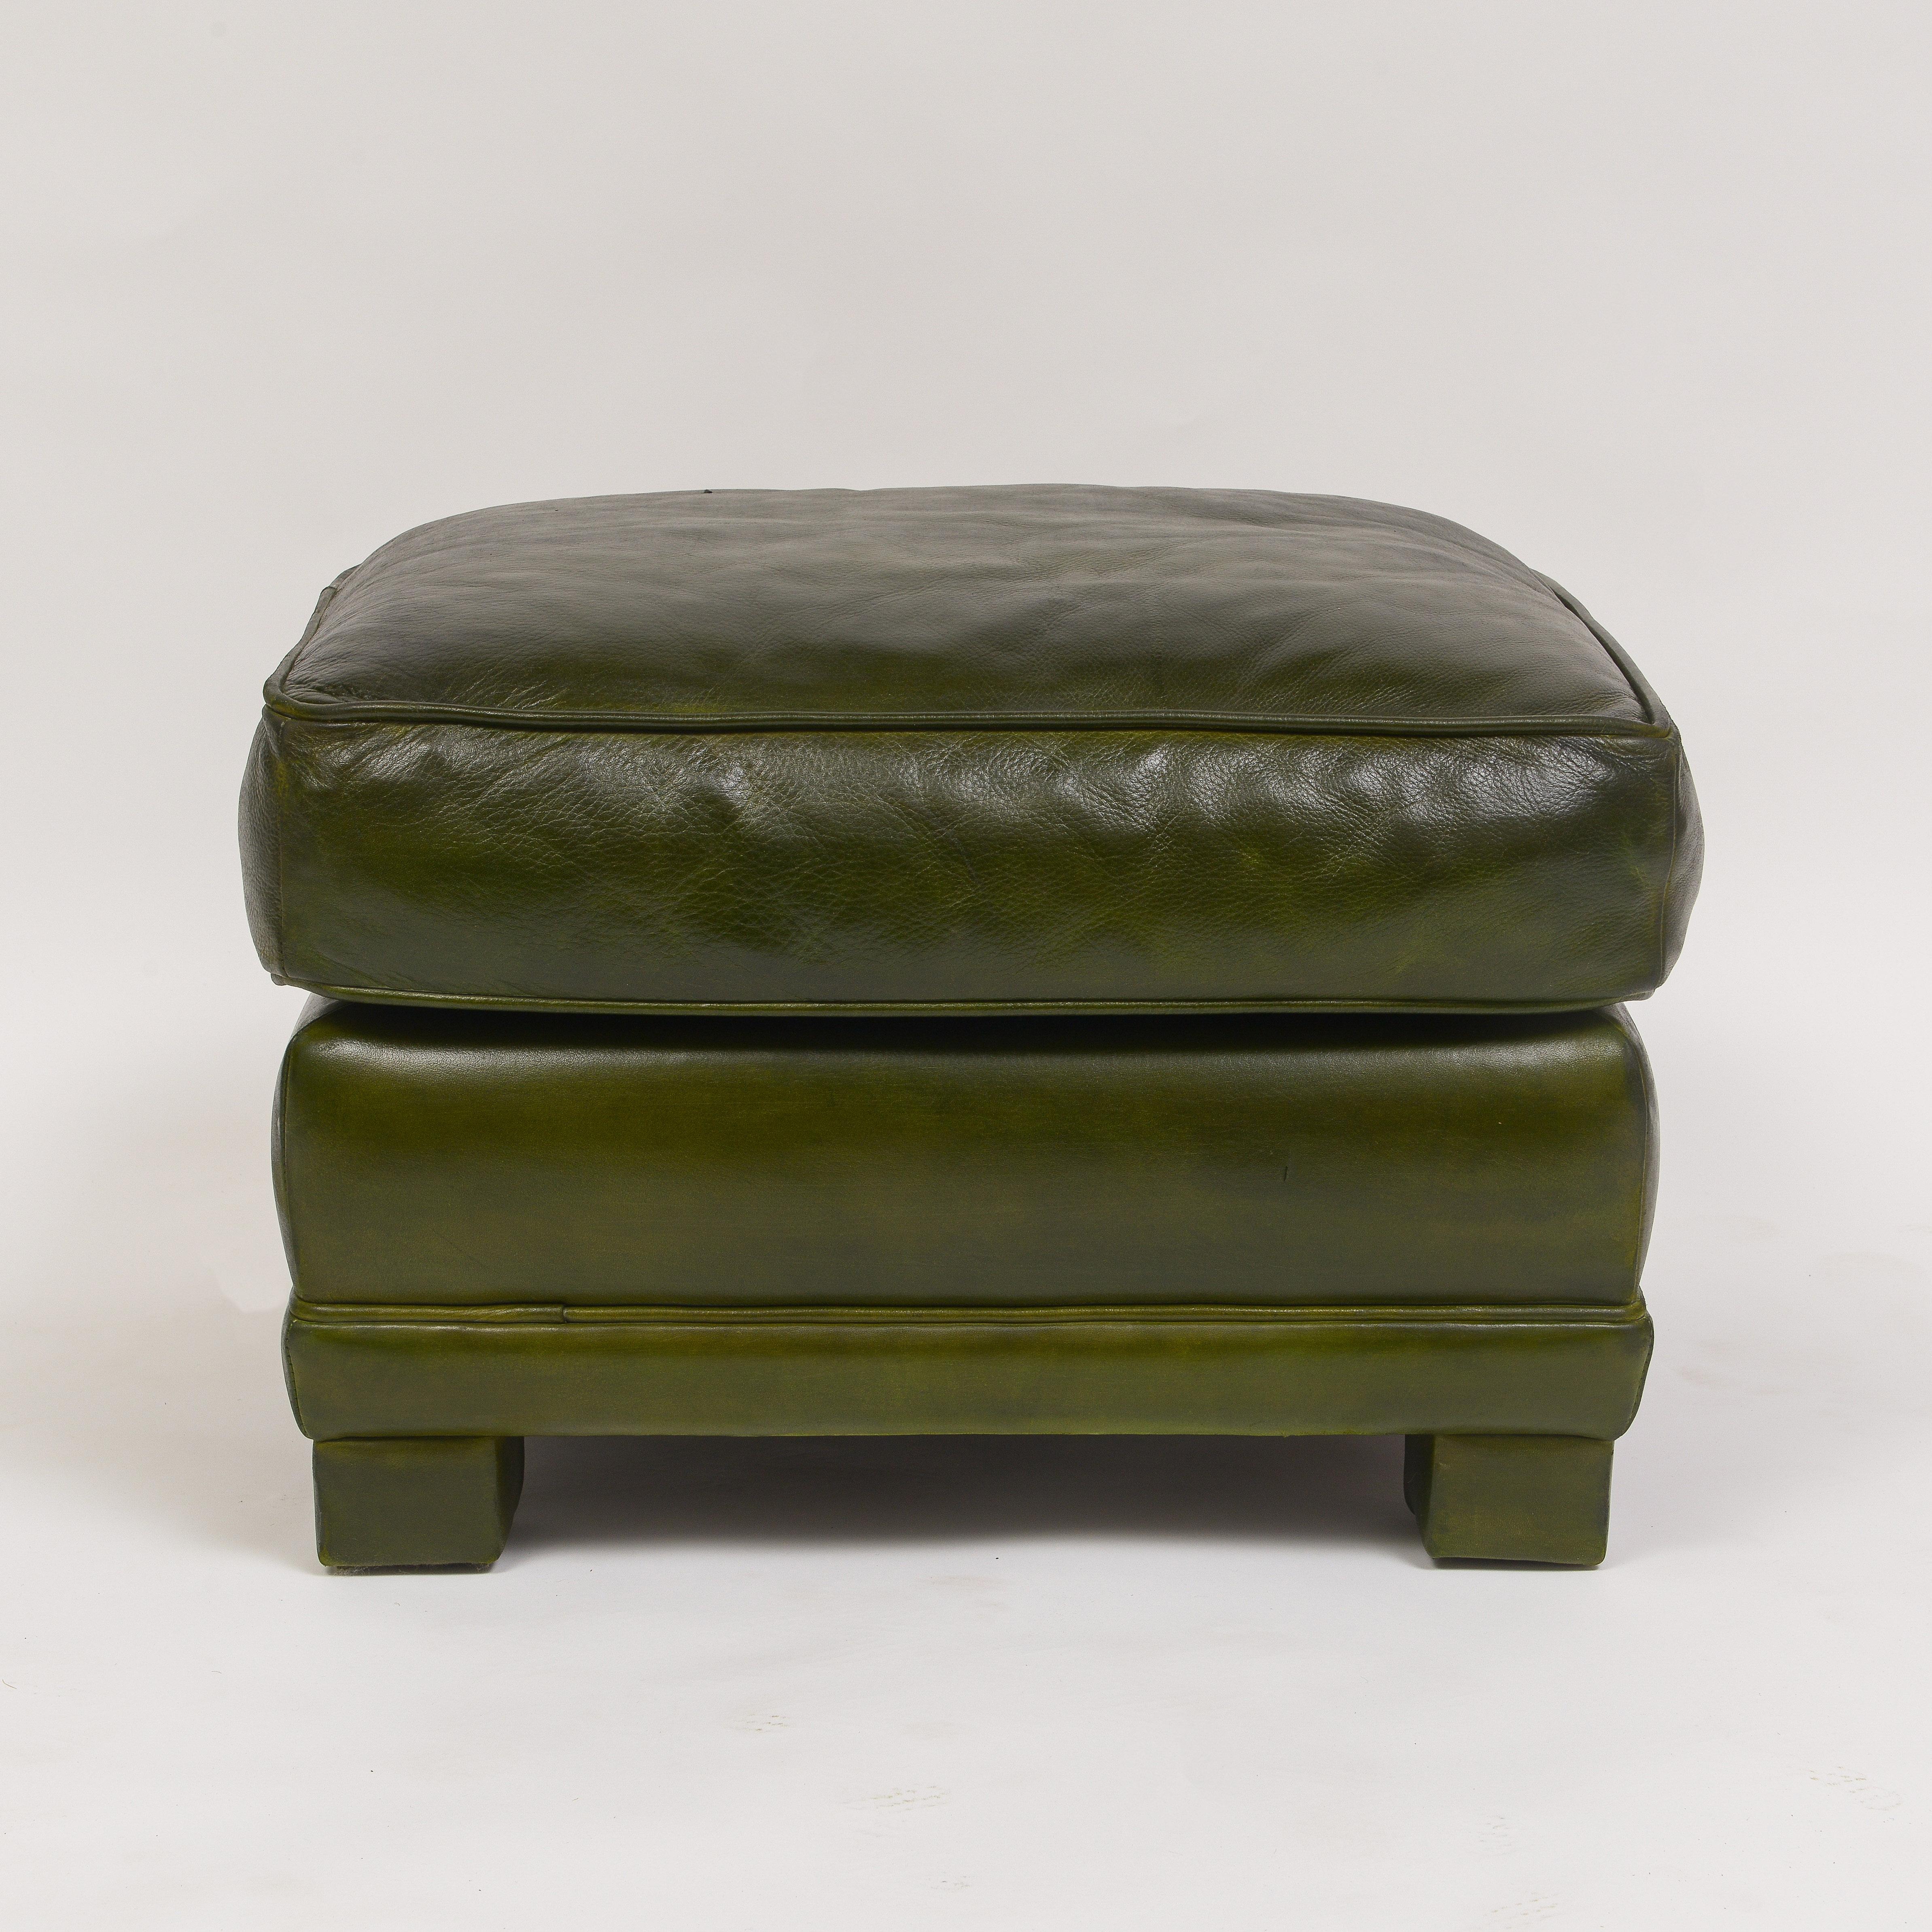 Early 21st Century Green Leather Club Chairs With Ottomans- 4 Pieces For Sale 4